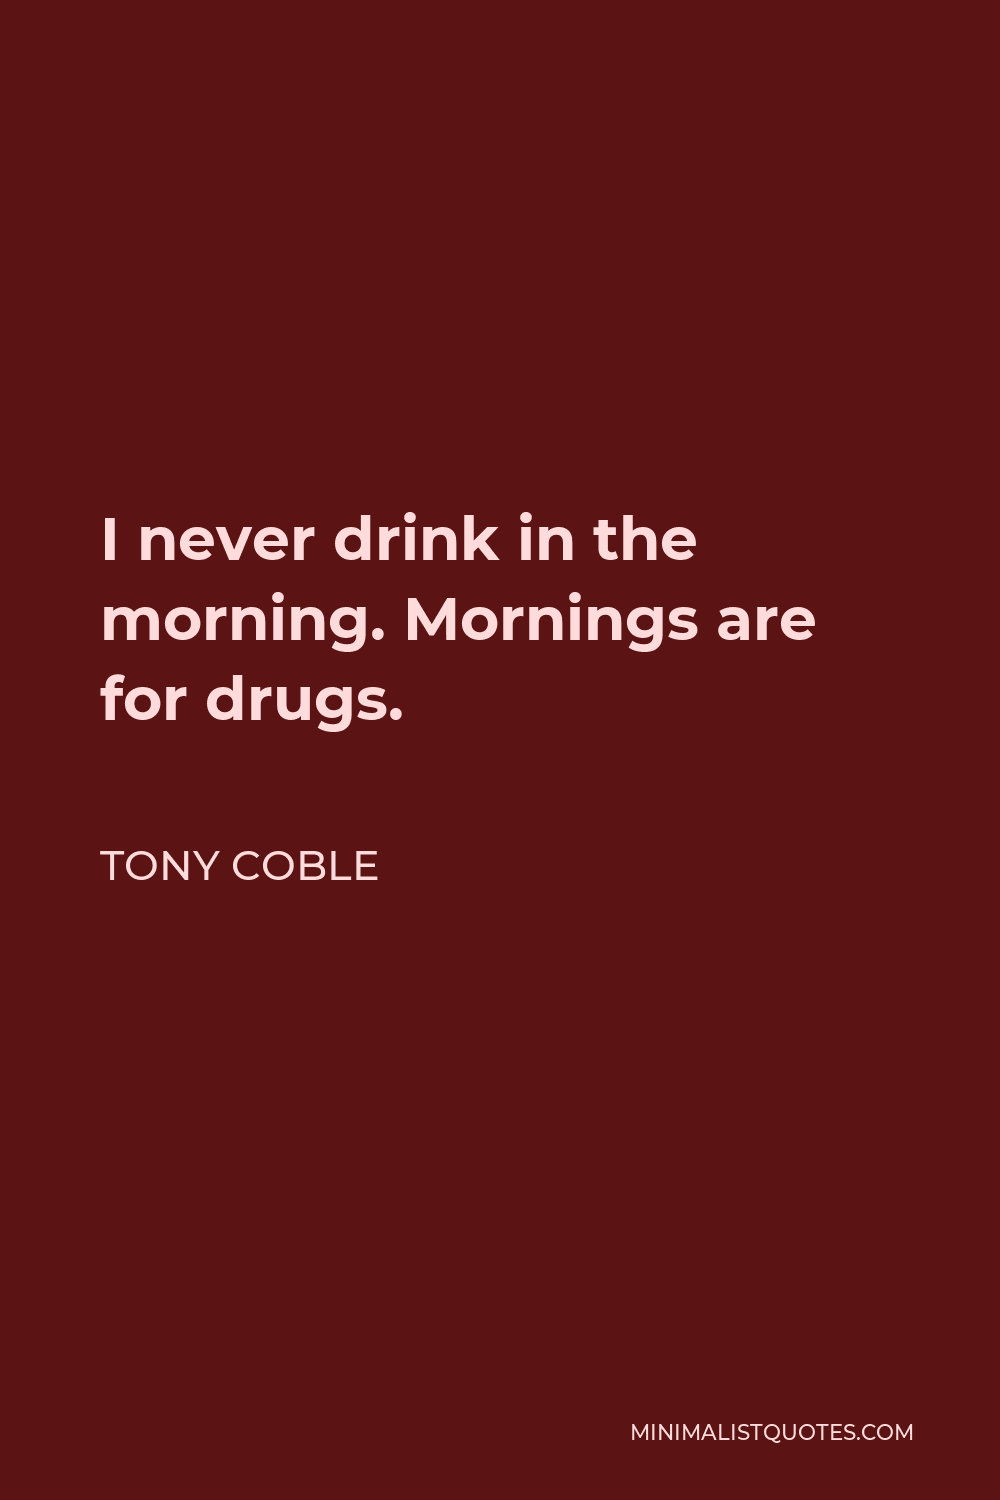 Tony Coble Quote - I never drink in the morning. Mornings are for drugs.